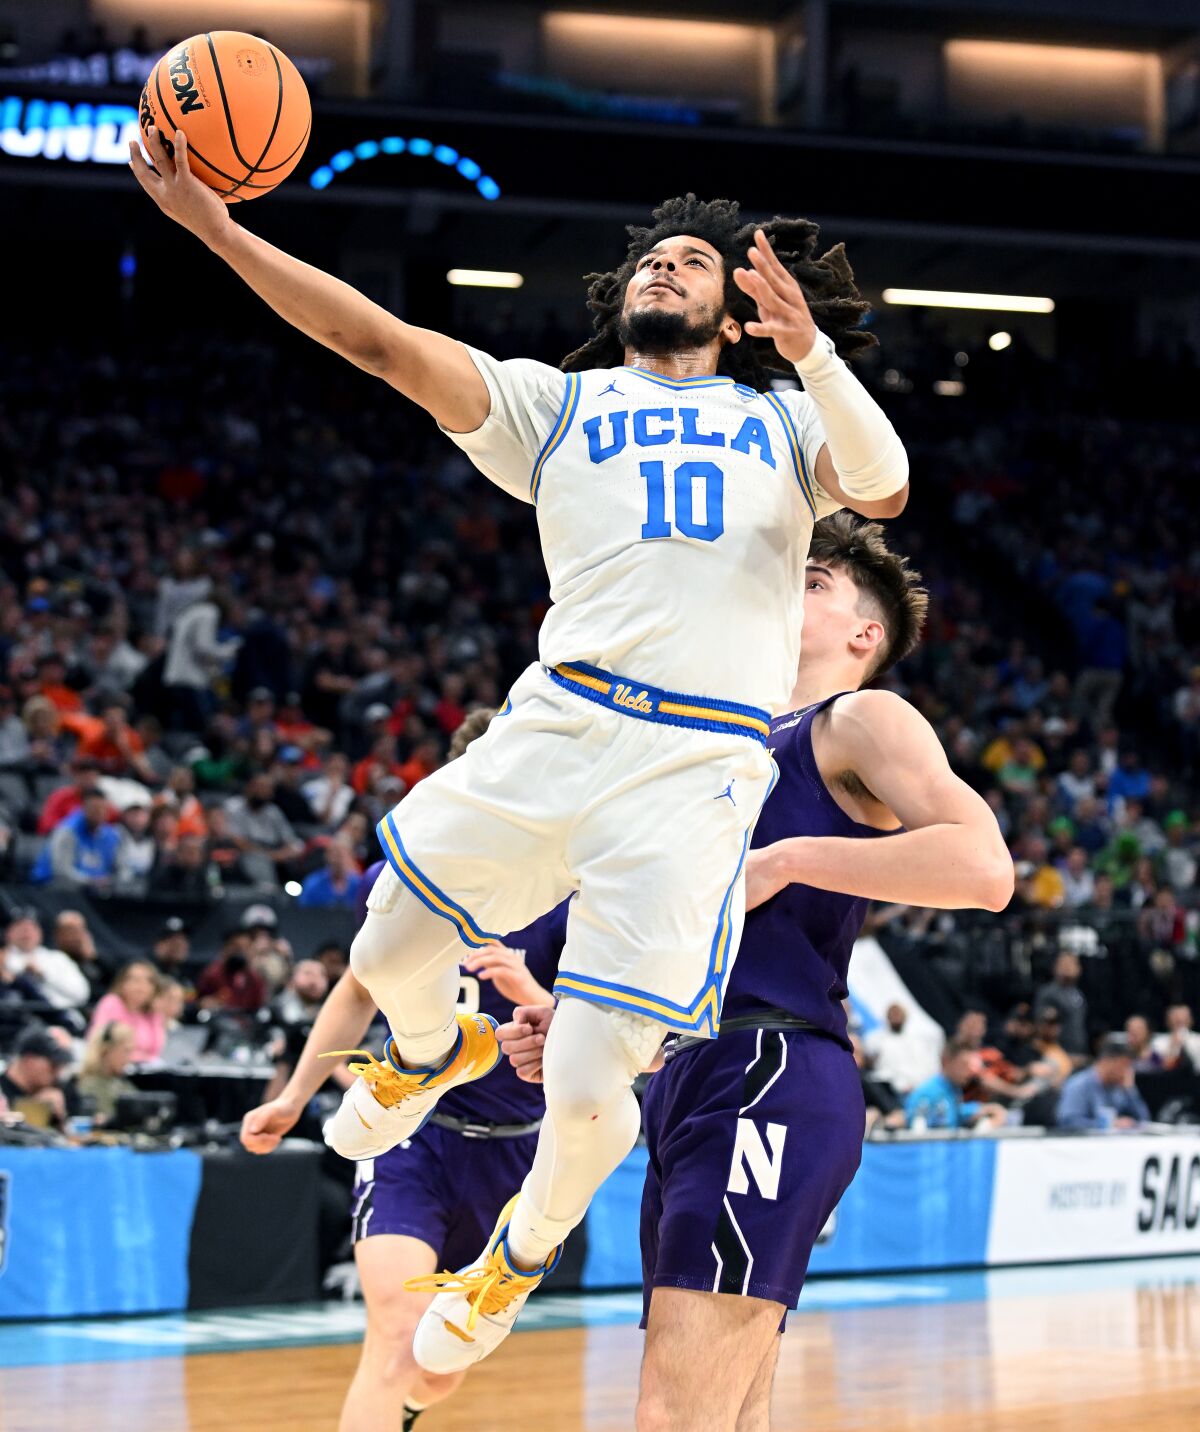 UCLA's Tyger Campbell puts up a shot against Northwestern in the first half Saturday.